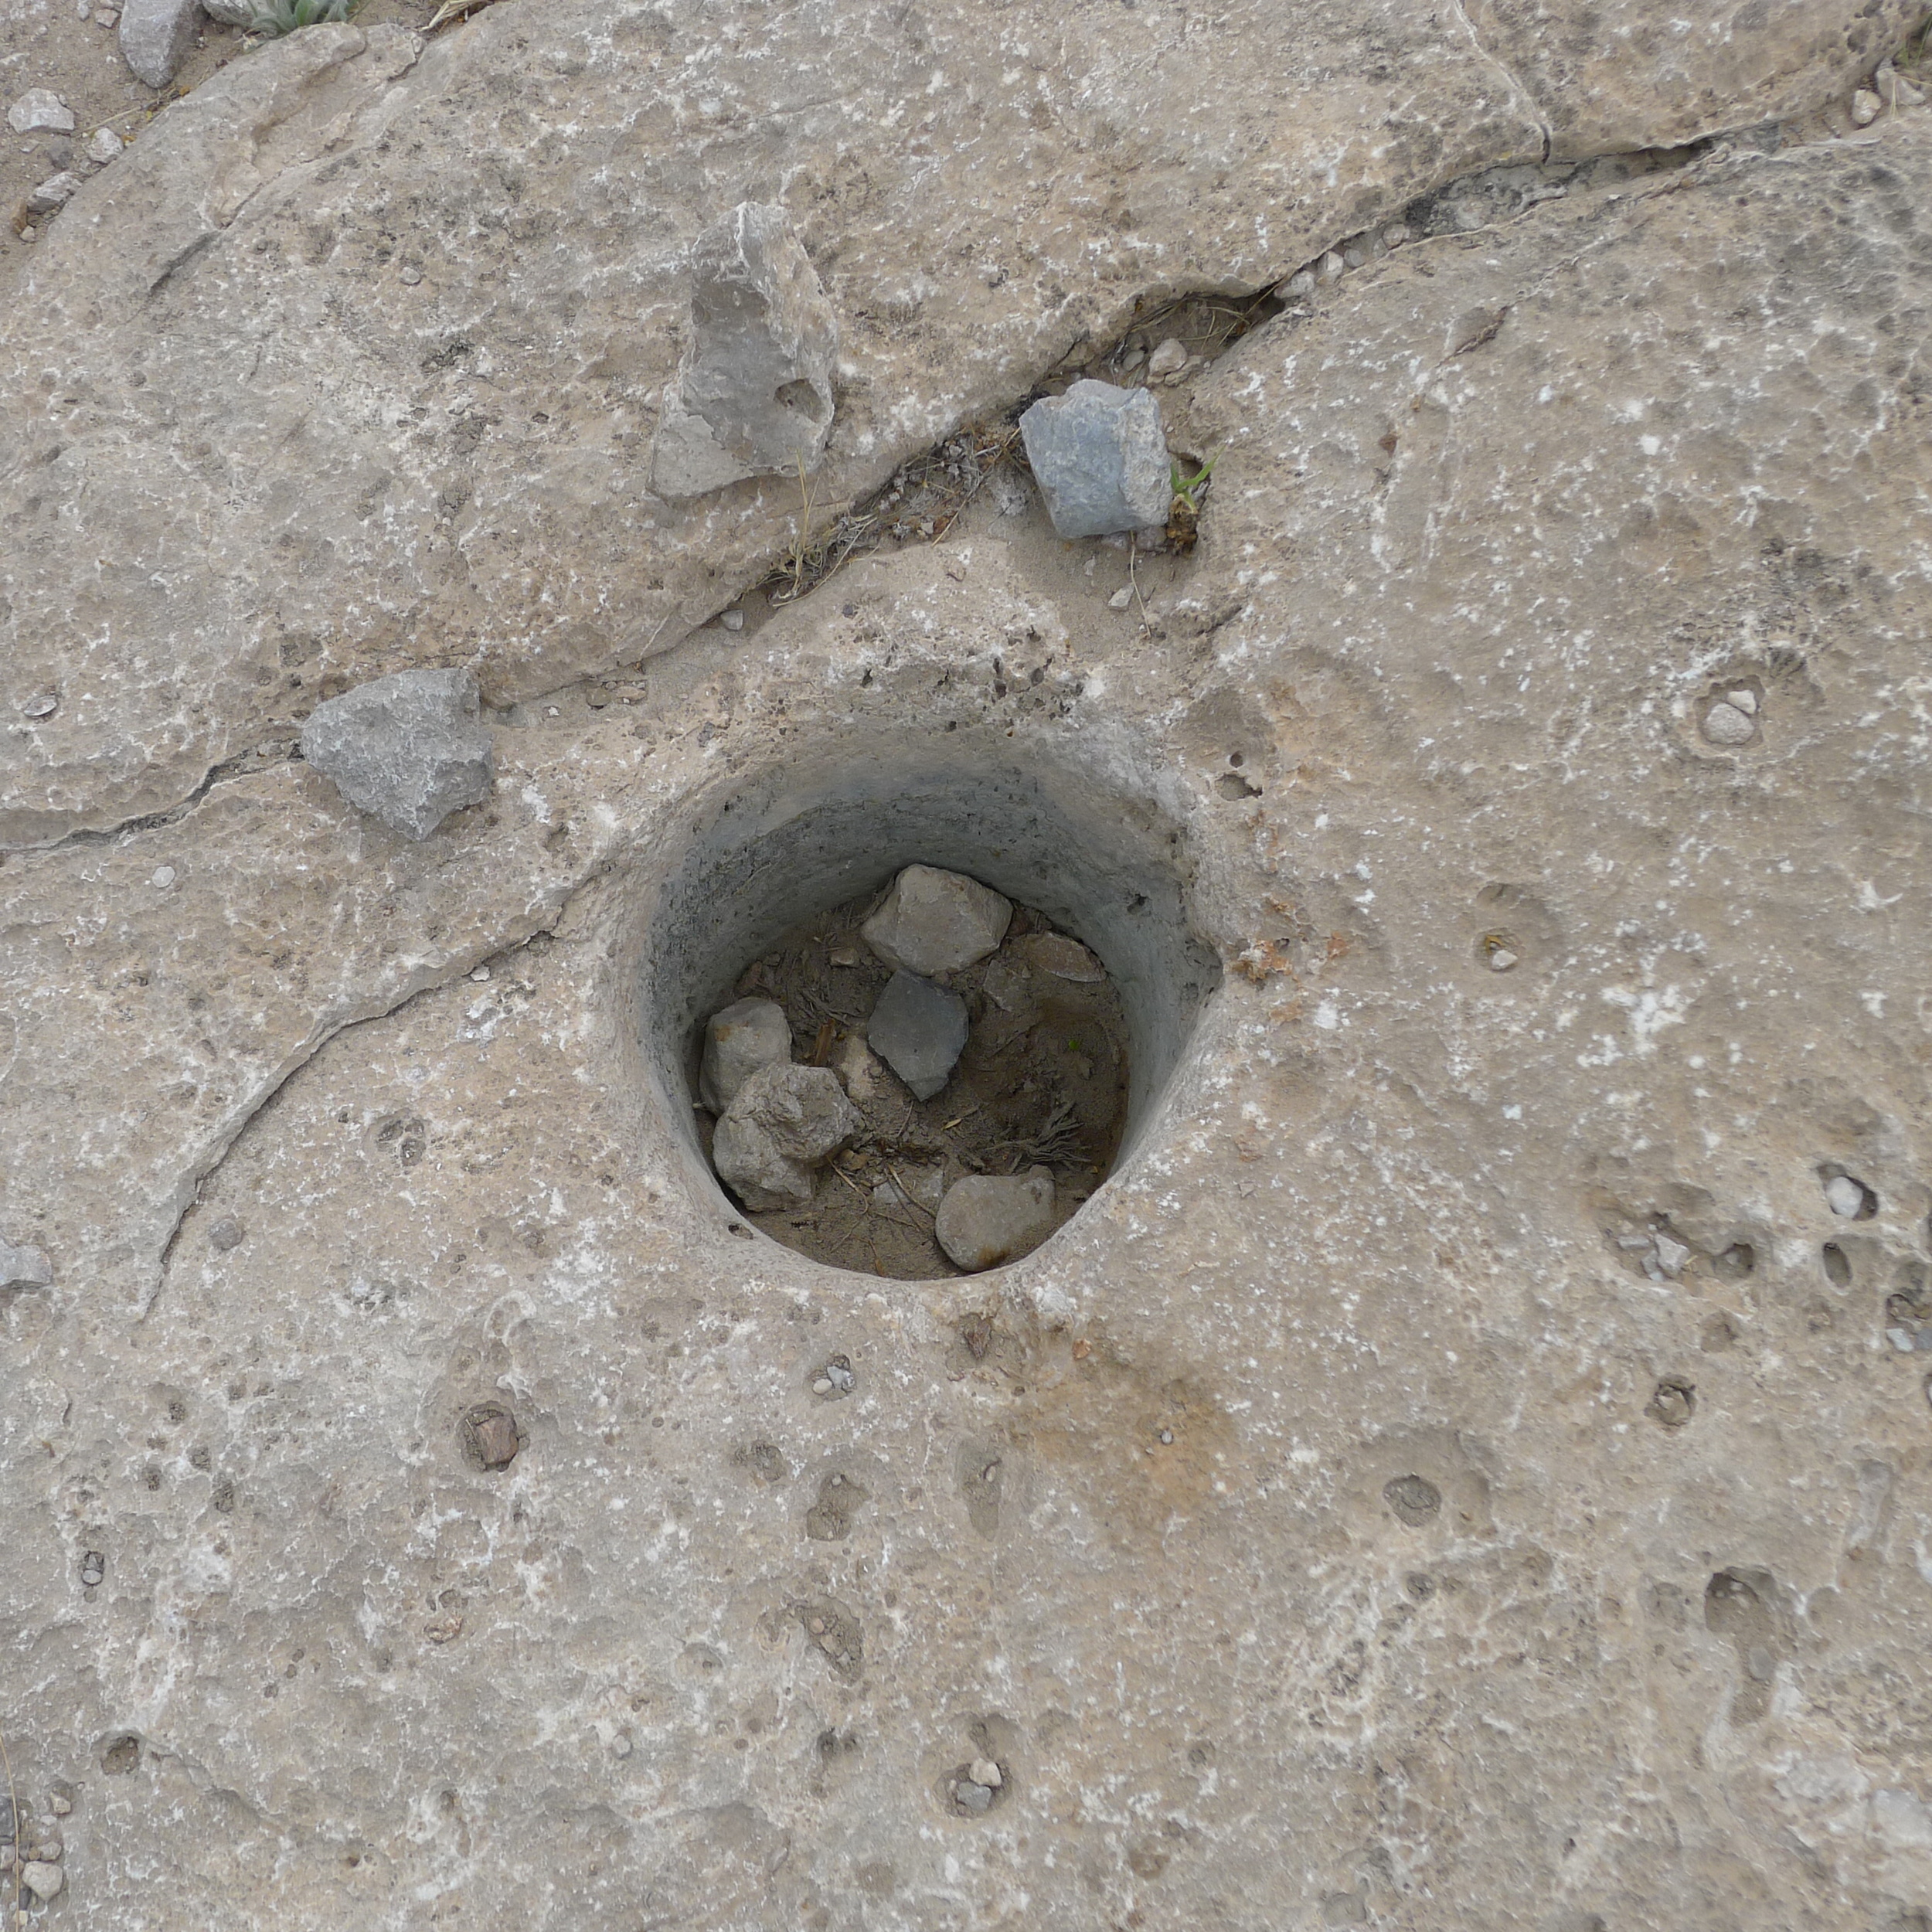 Ancient Indian food grinding hole.